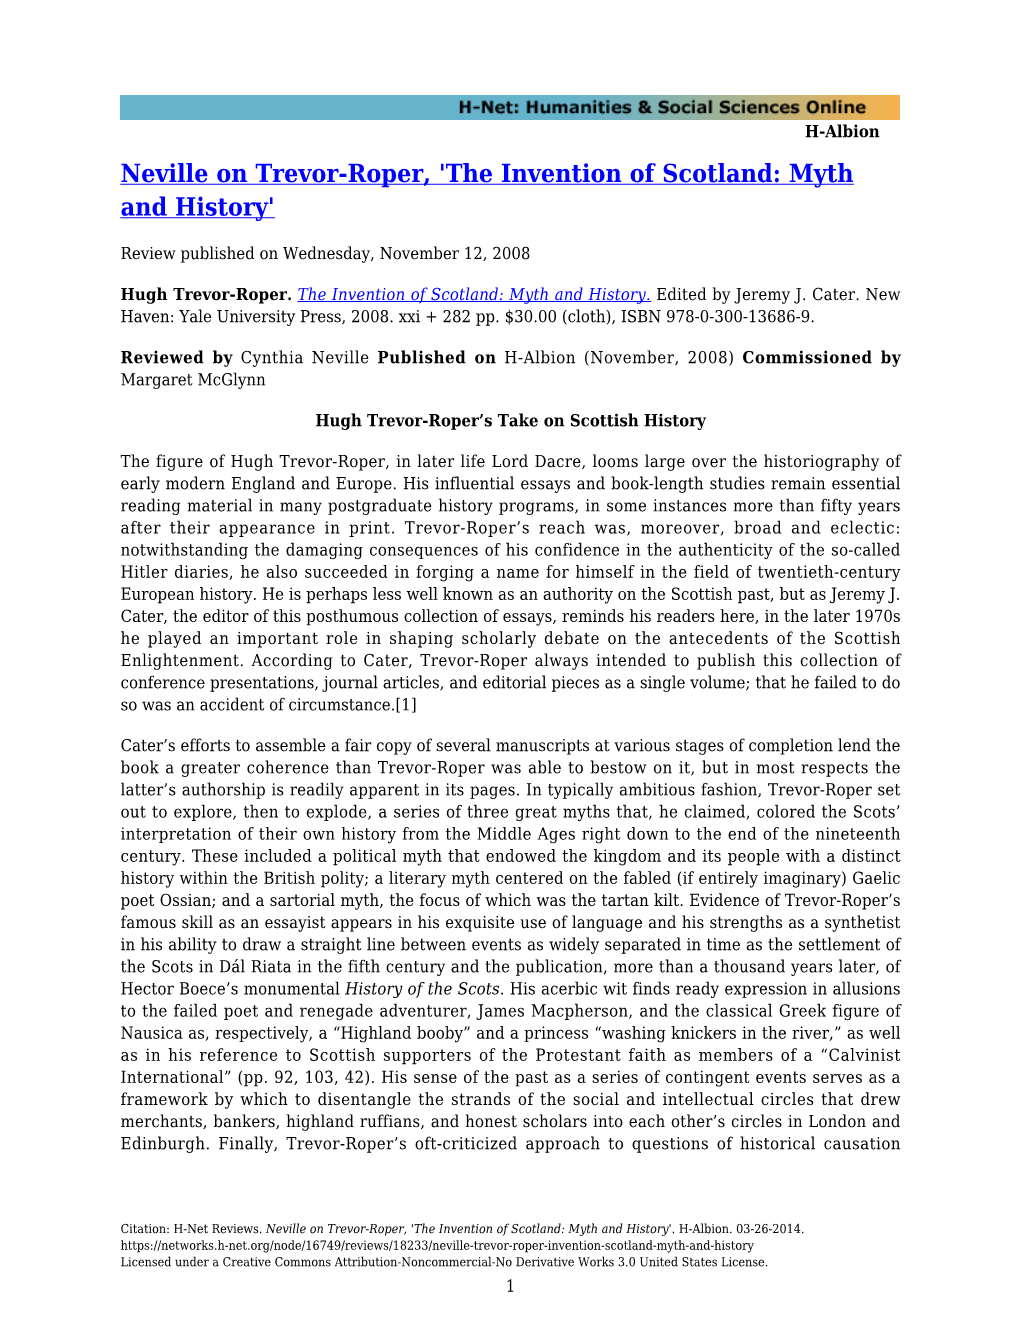 Neville on Trevor-Roper, 'The Invention of Scotland: Myth and History'